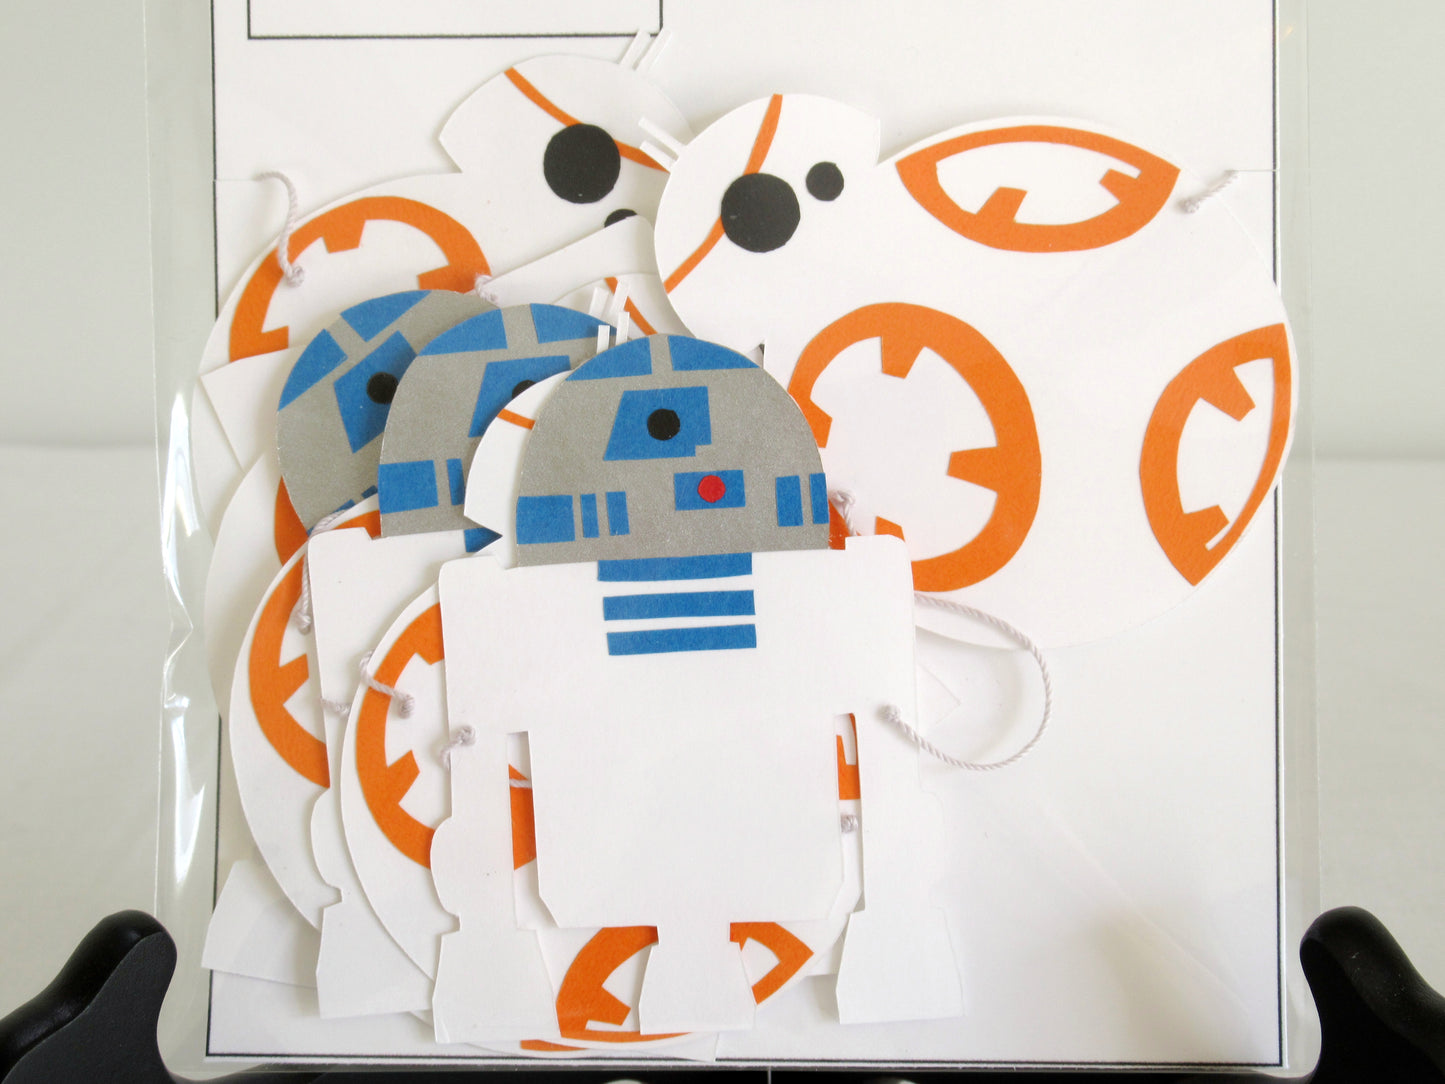 R2D2 and BB8 (Star Wars) Paper Garland